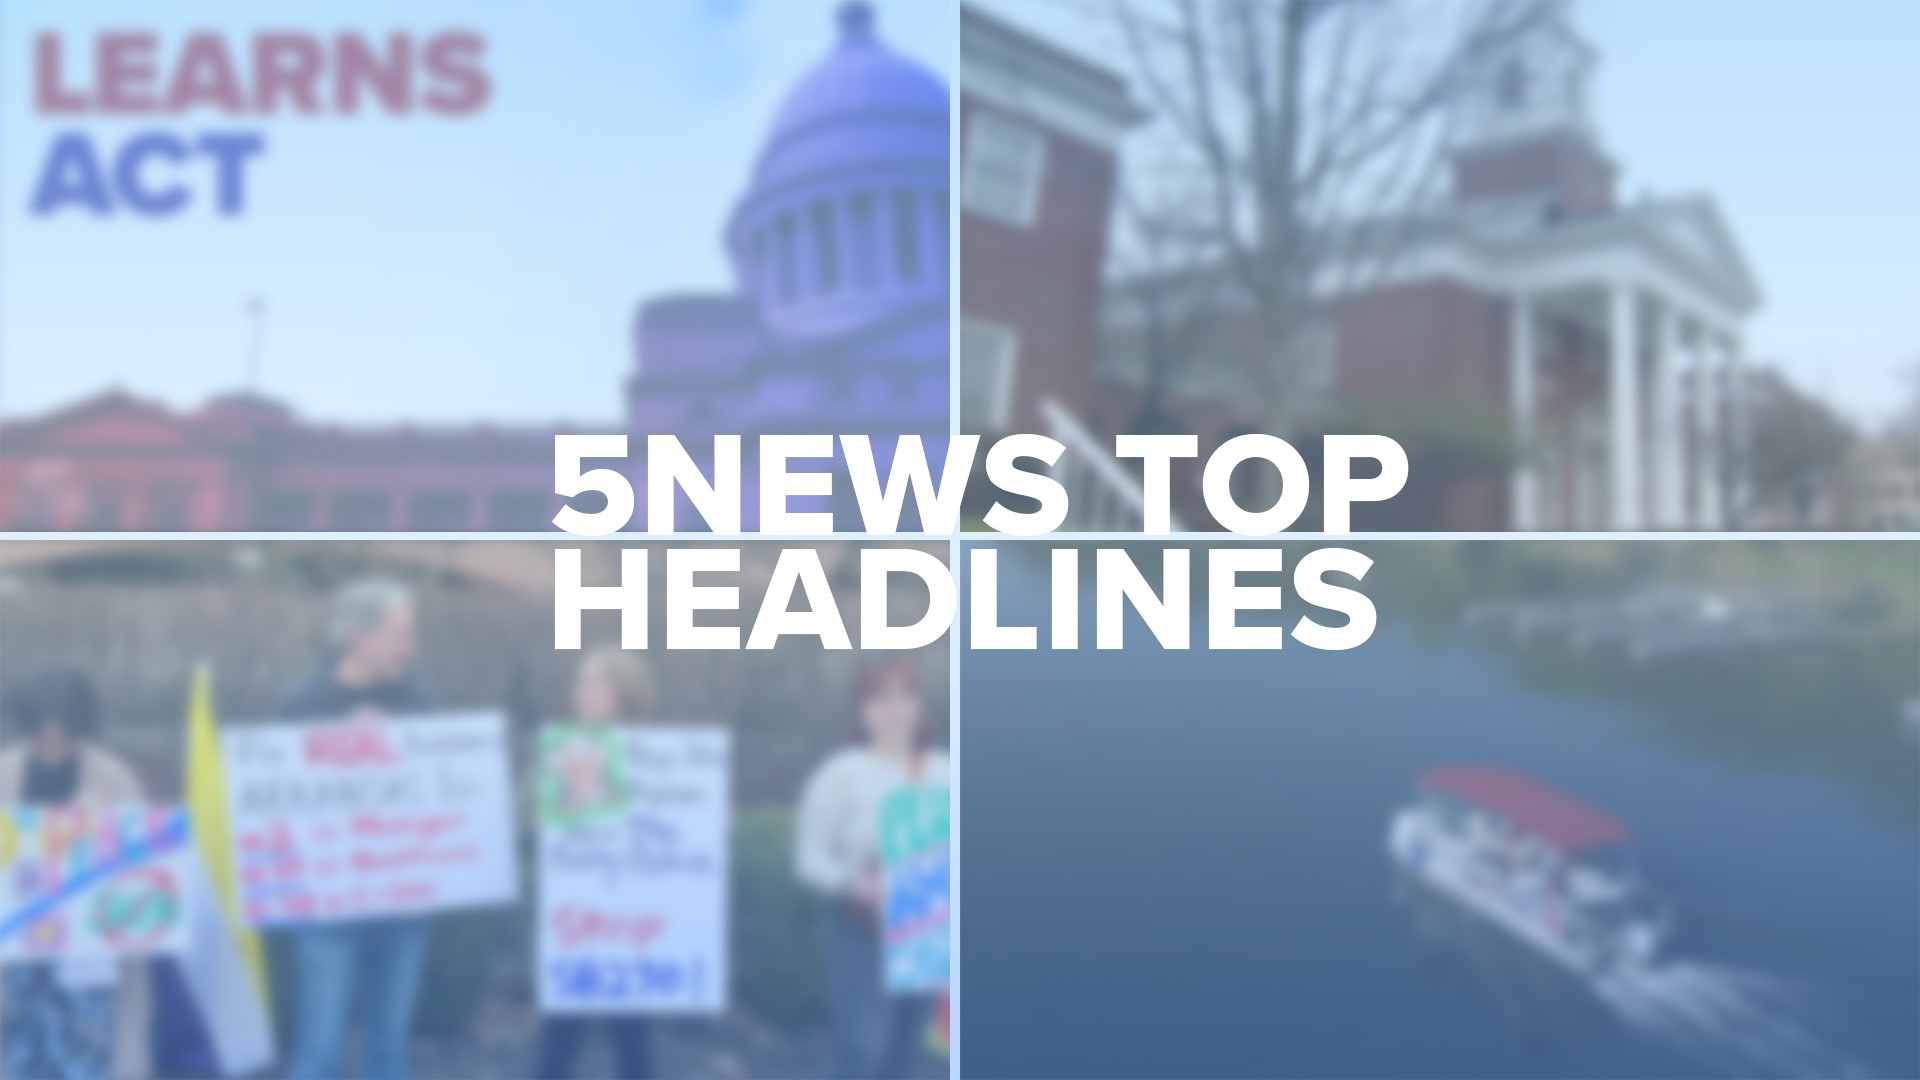 Take a look at today's top headlines for local news across our area!